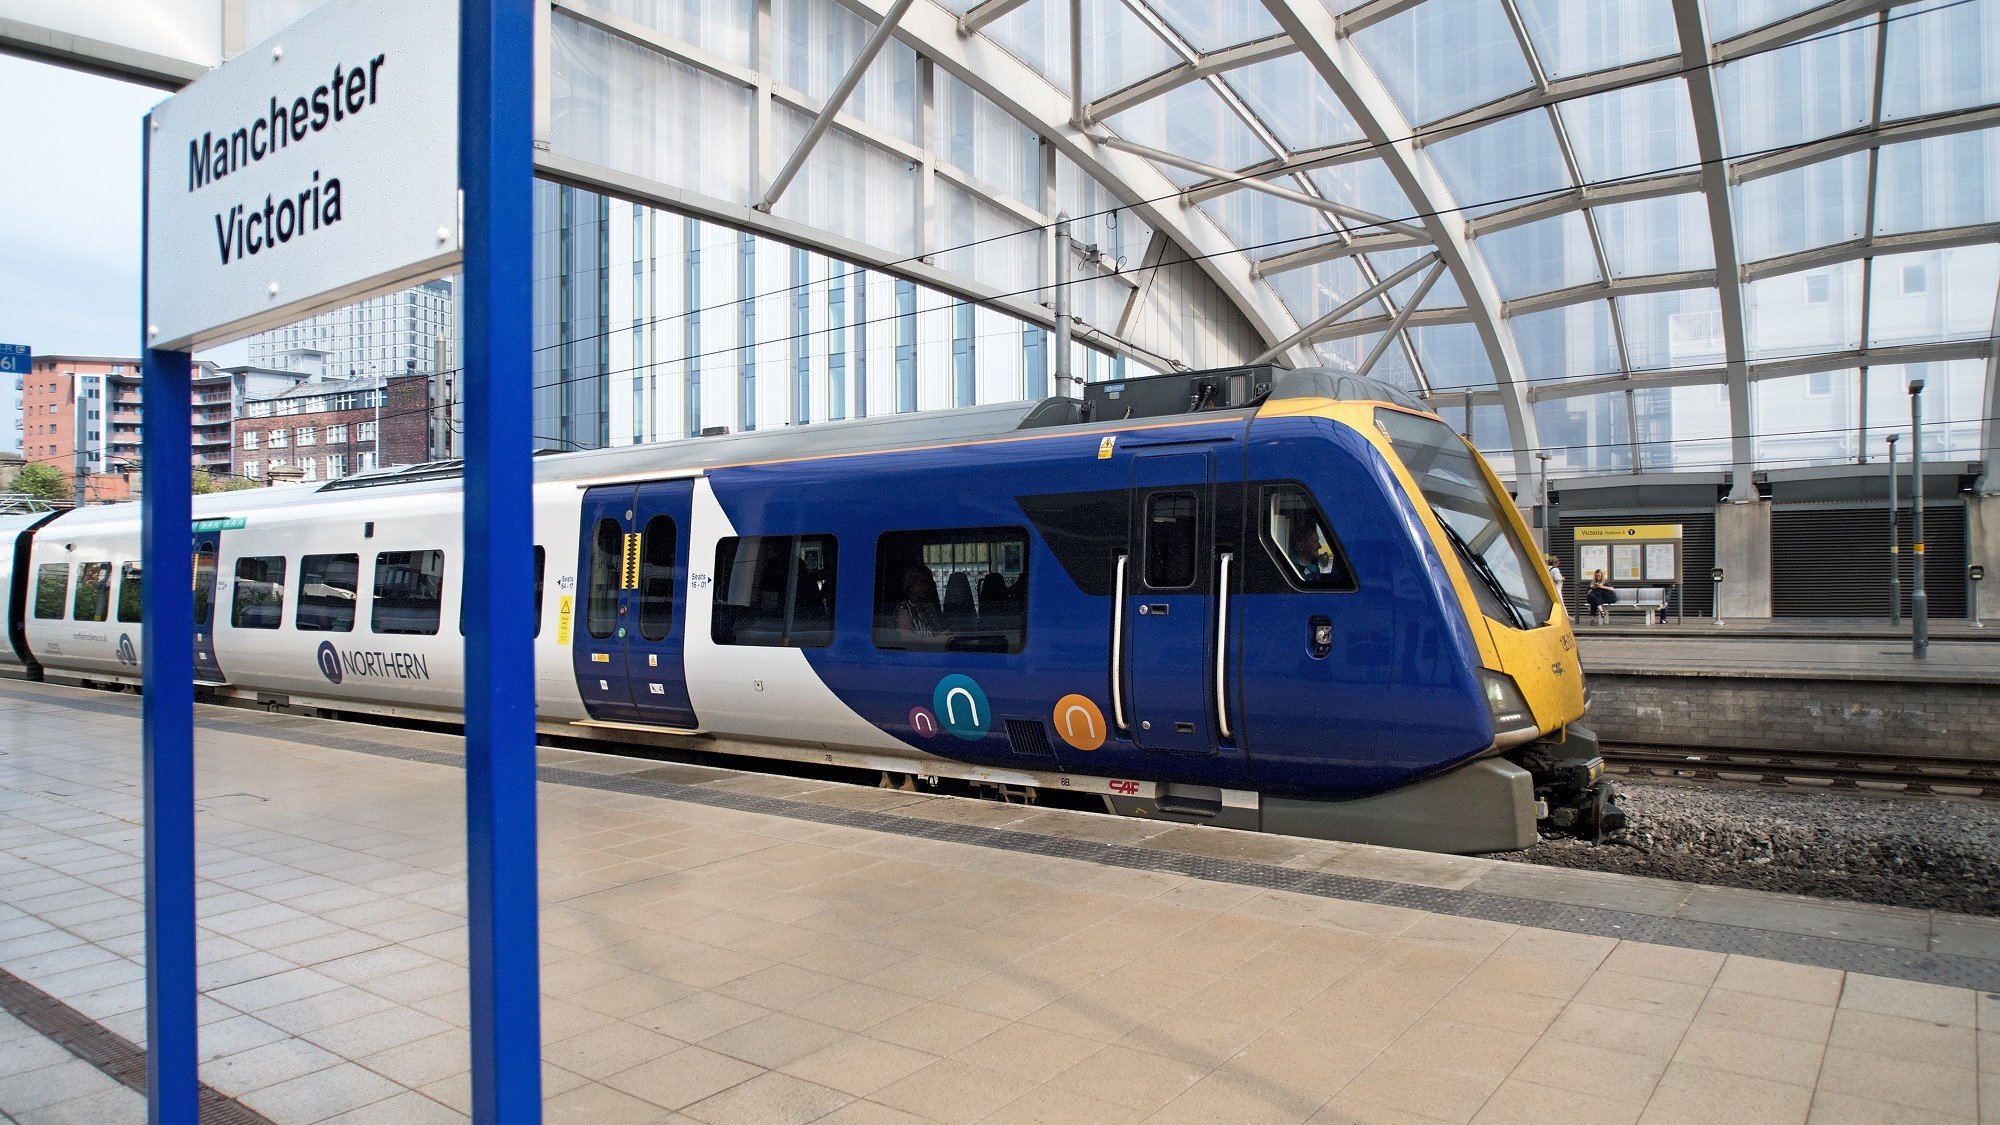 Image shows Northern service at Manchester Victoria